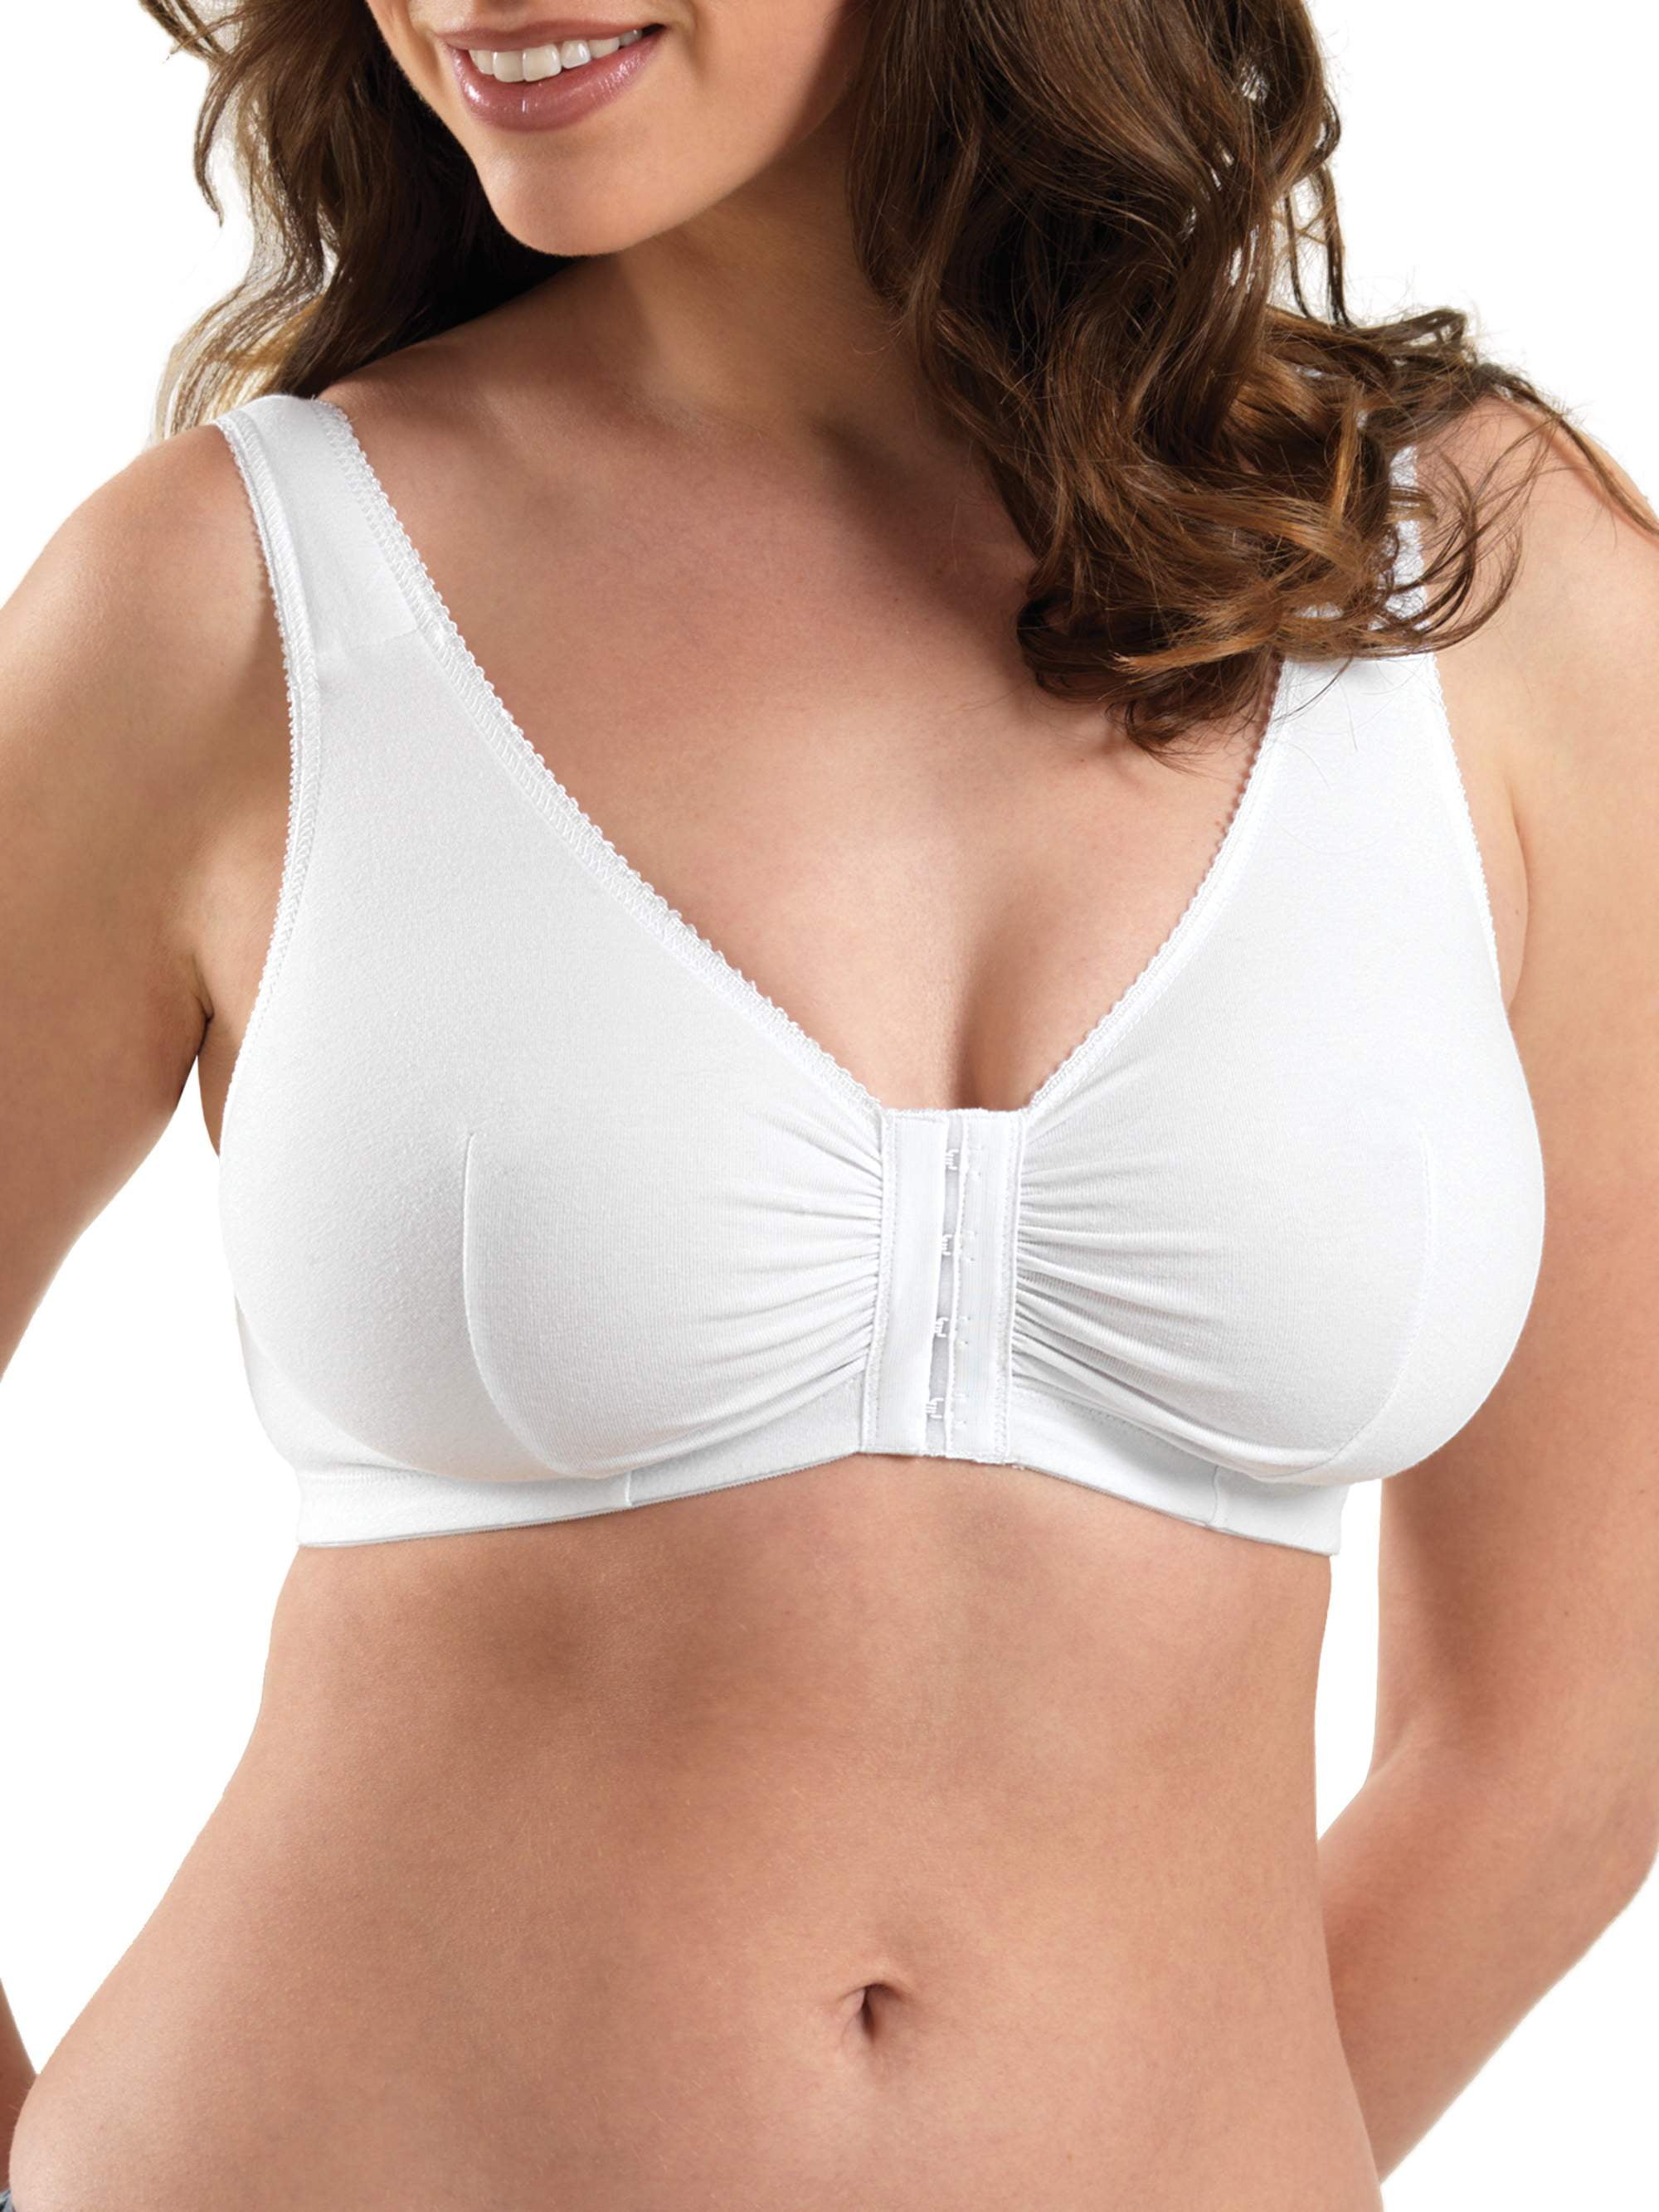 Leading Lady Womens Front-Close Cotton Wire-Free Bra Style-110